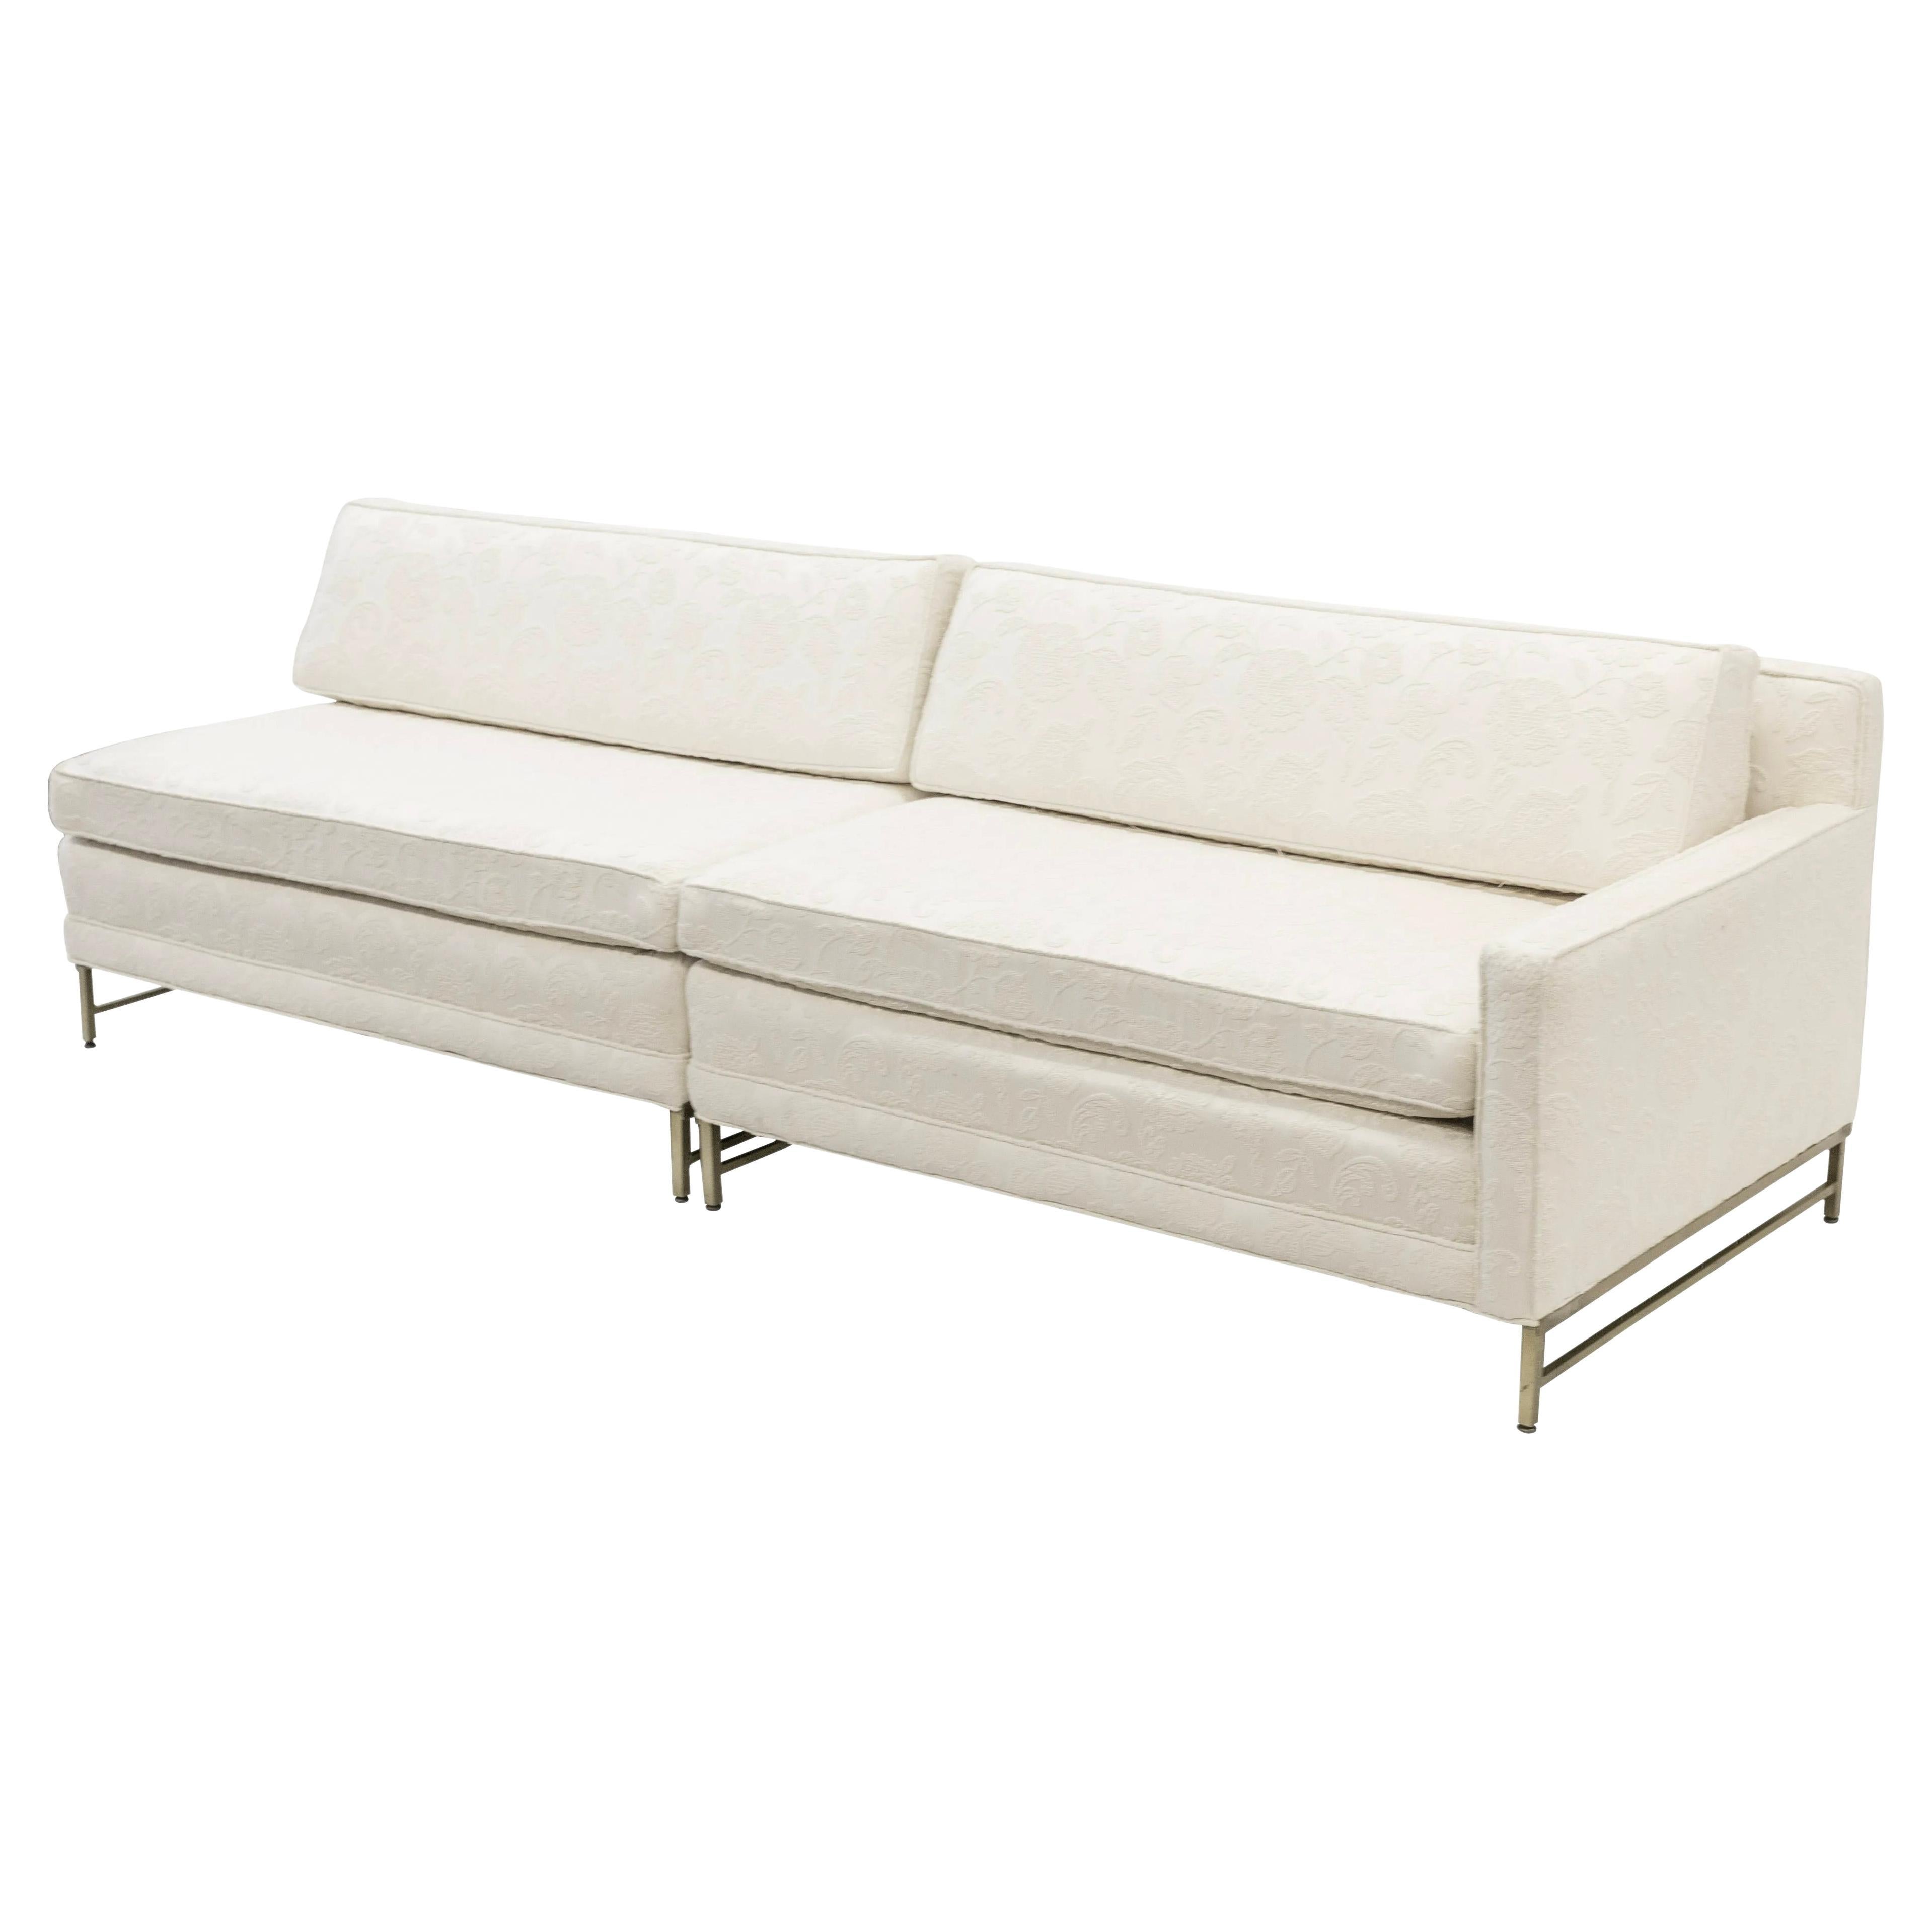 Paul McCobb for Directional, two piece sectional sofa, c 1958. Cream on cream minimal Jacobean floral textile and solid brass. Two parts can be used together as one long sofa or as separate pieces. Gorgeous lines and minimal modern design. Single